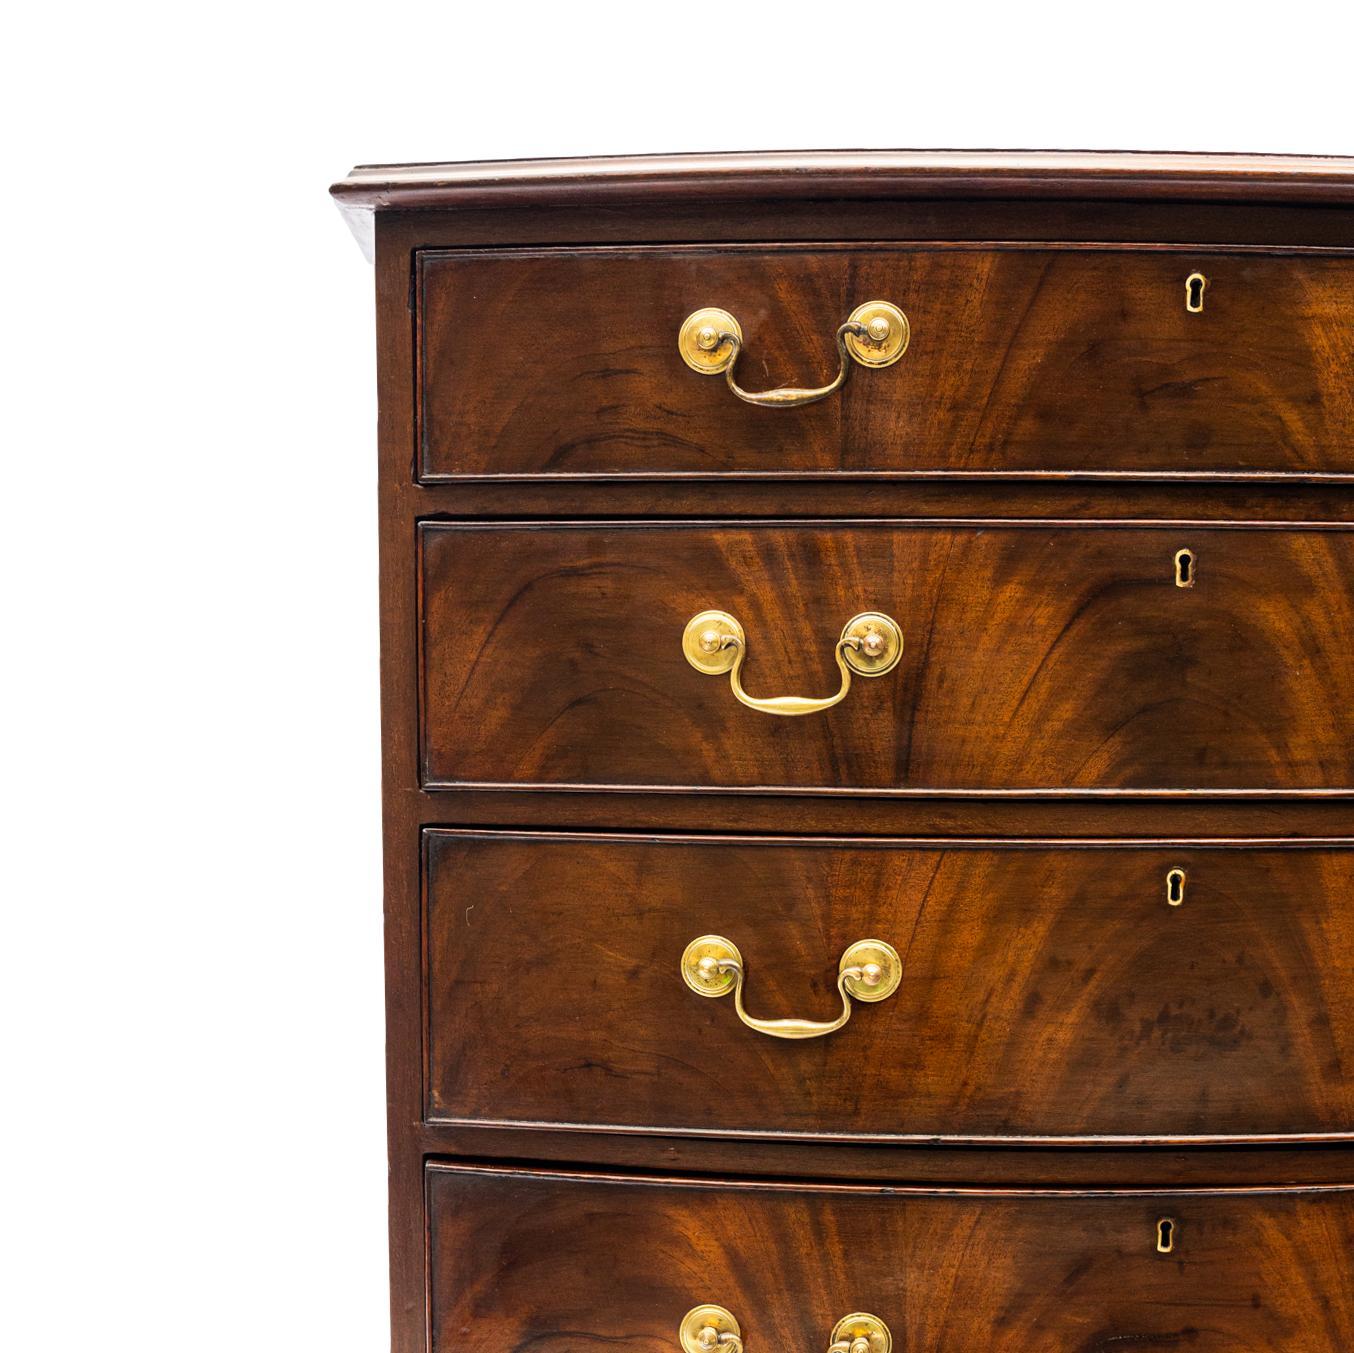 A George IV Period Bowfront Chest in Figured mahogany, with four graduated and cock-beaded drawers, the top with a molded edge, on a shaped apron base and graceful splayed feet (original), with hand-forged brass bail pulls (original), with oak